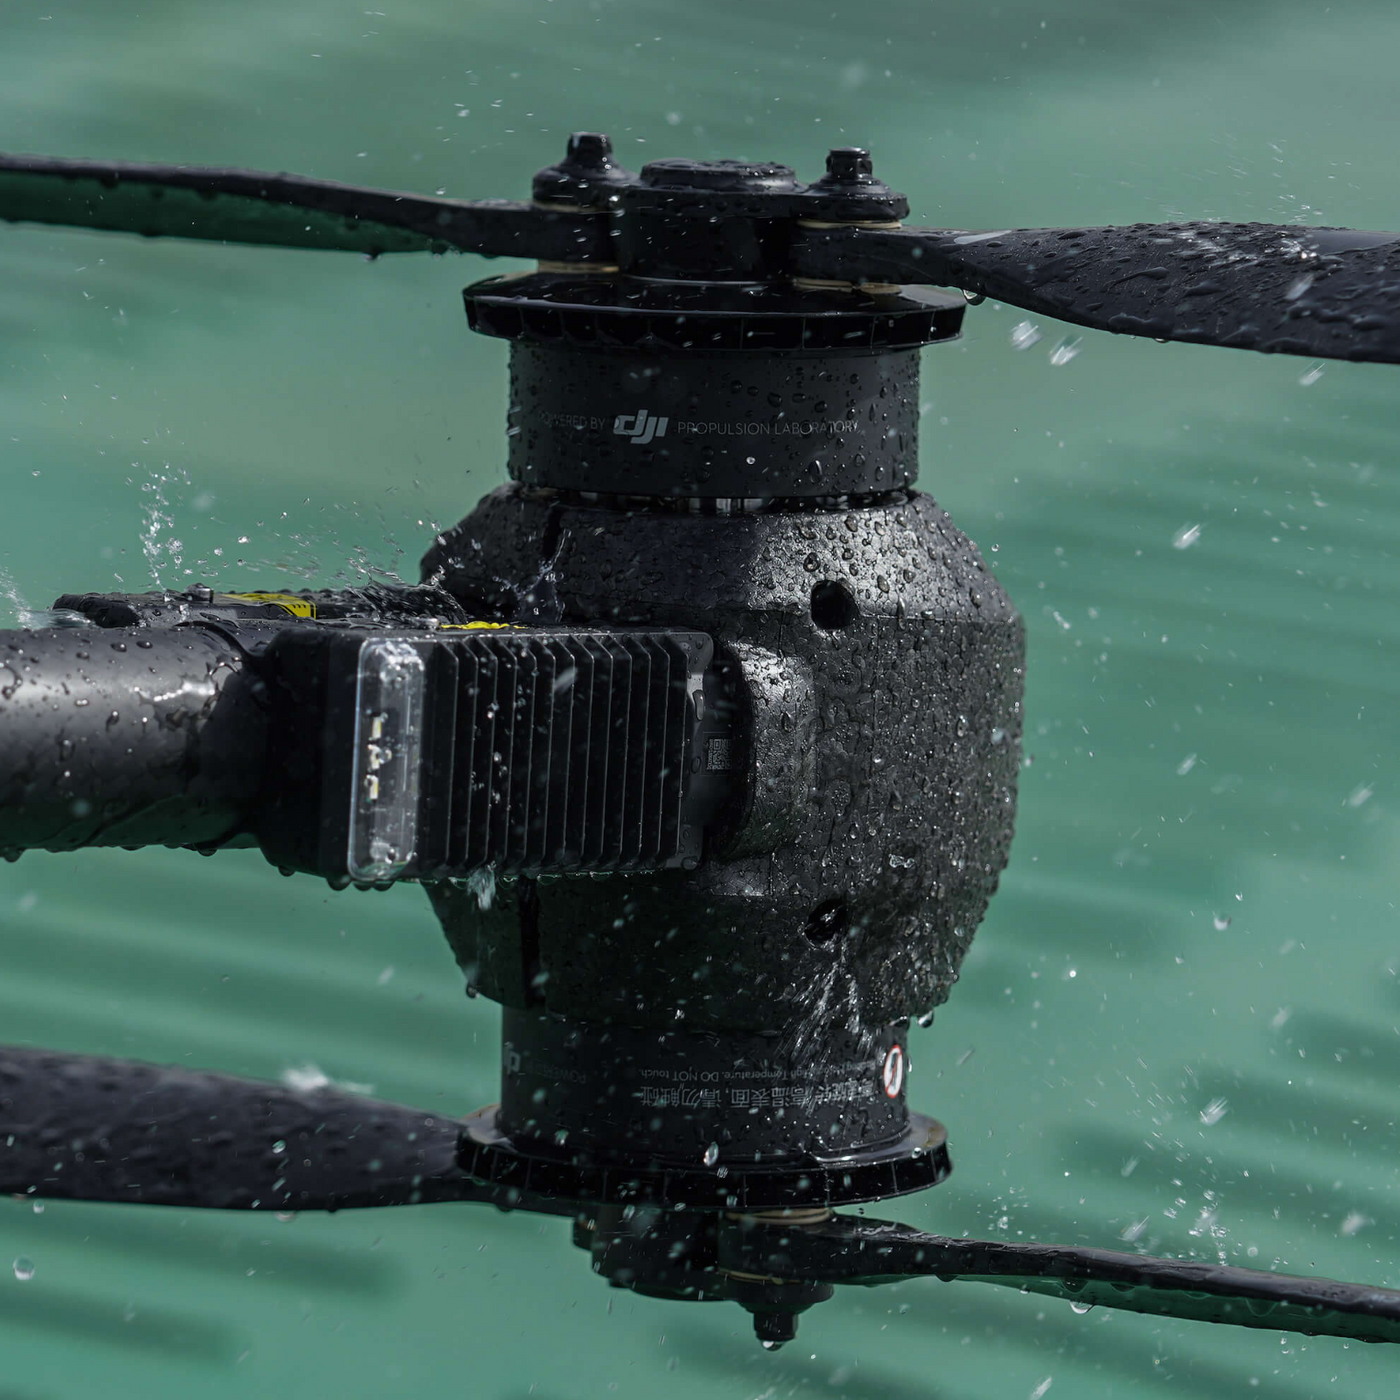 Flying A Drone In The Rain: A Guide To IP Ratings